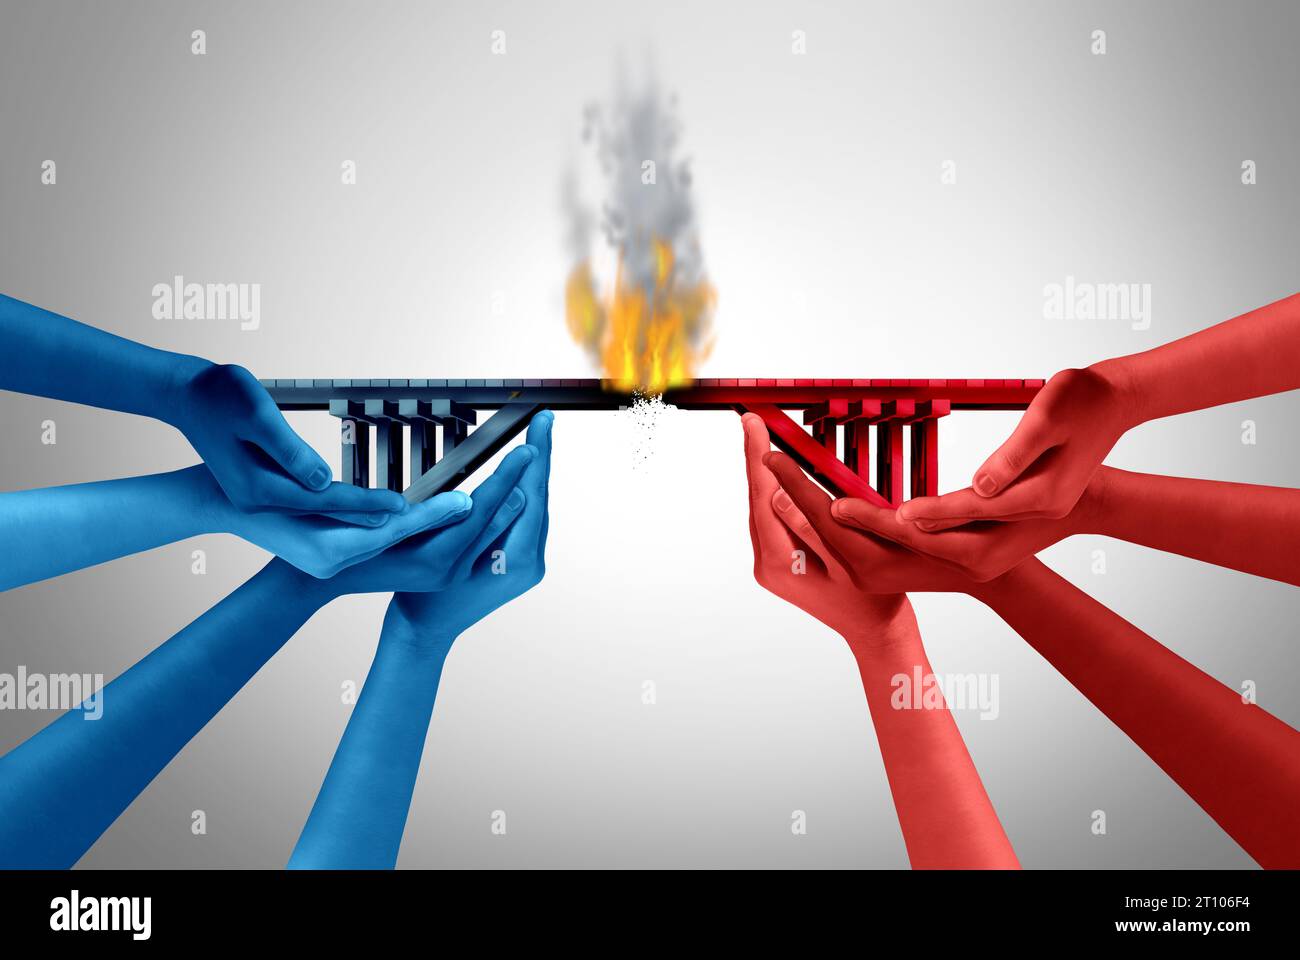 Breakdown Of Communication as a symbol of group division and a divided society as a burning bridge connection. Stock Photo